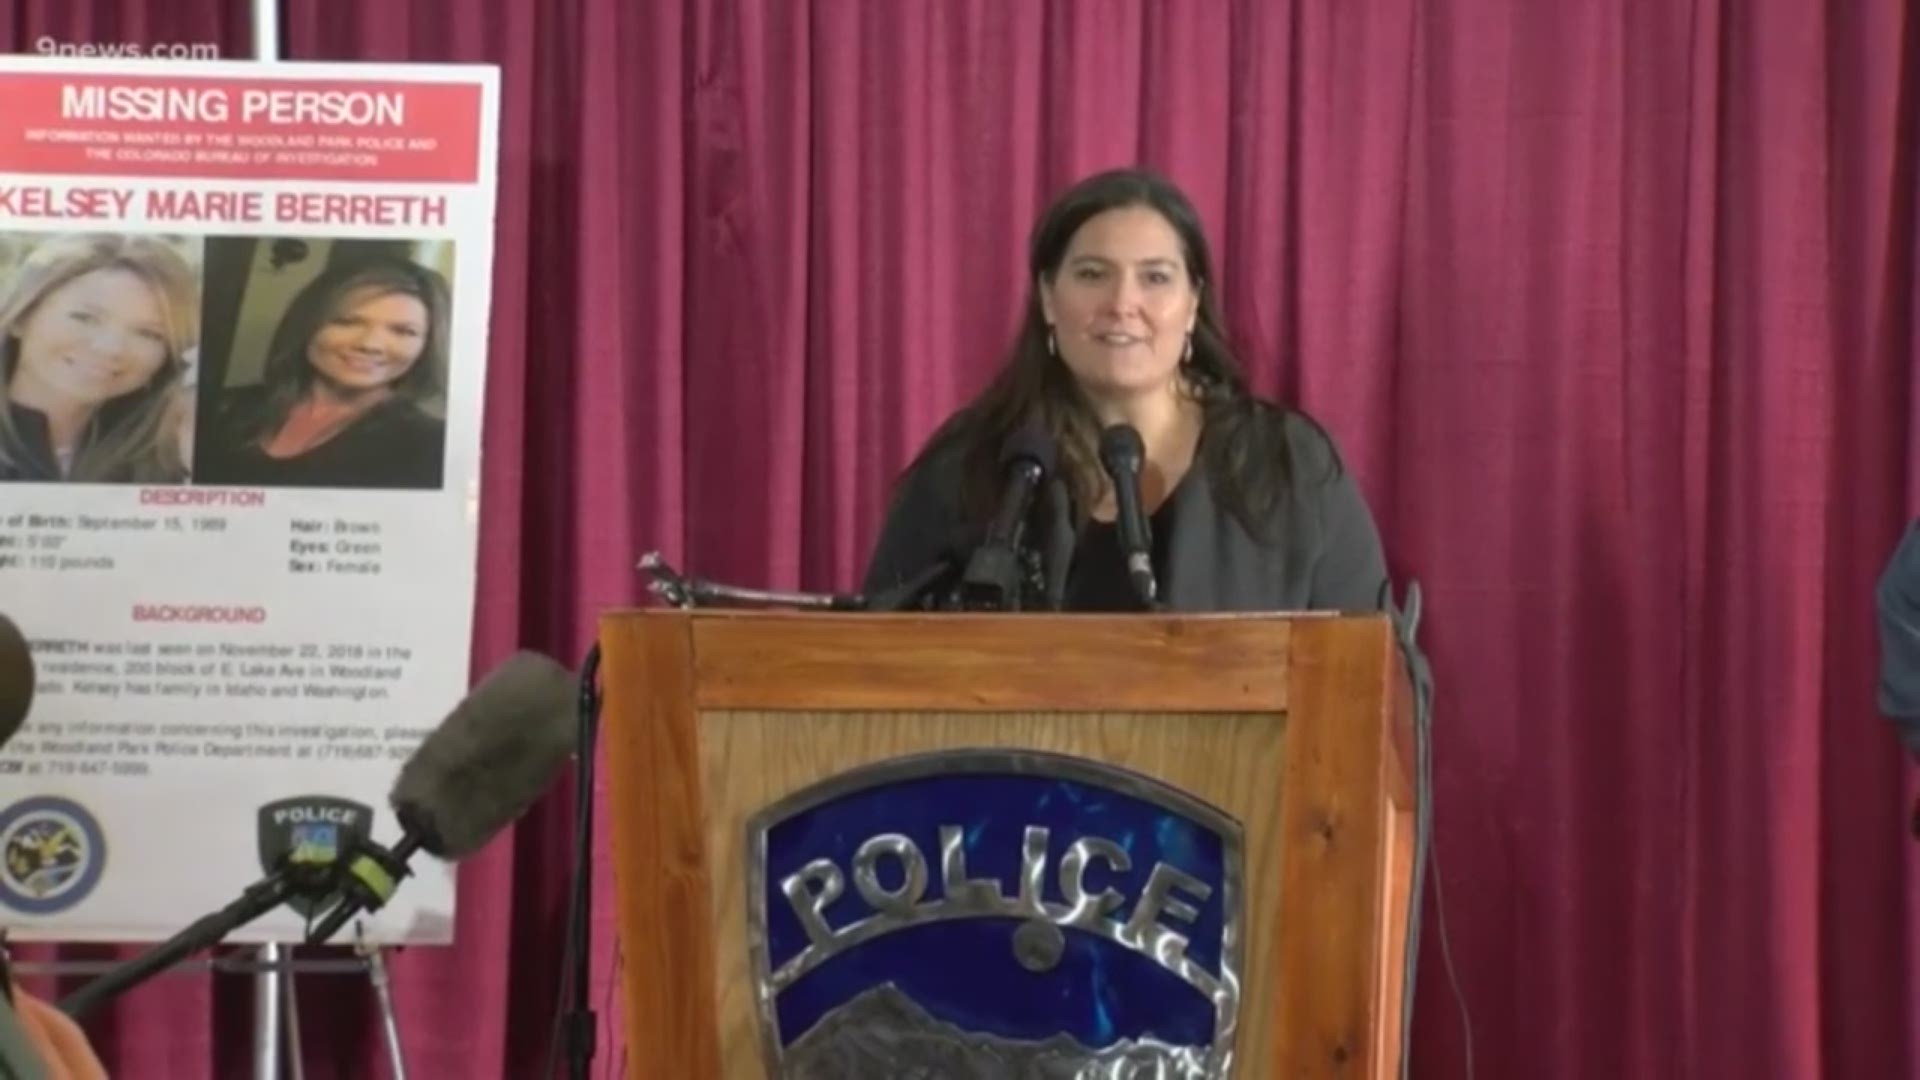 Law enforcement officials held a press conference Friday afternoon to give an update in the search for 29-year-old Kelsey Berreth.